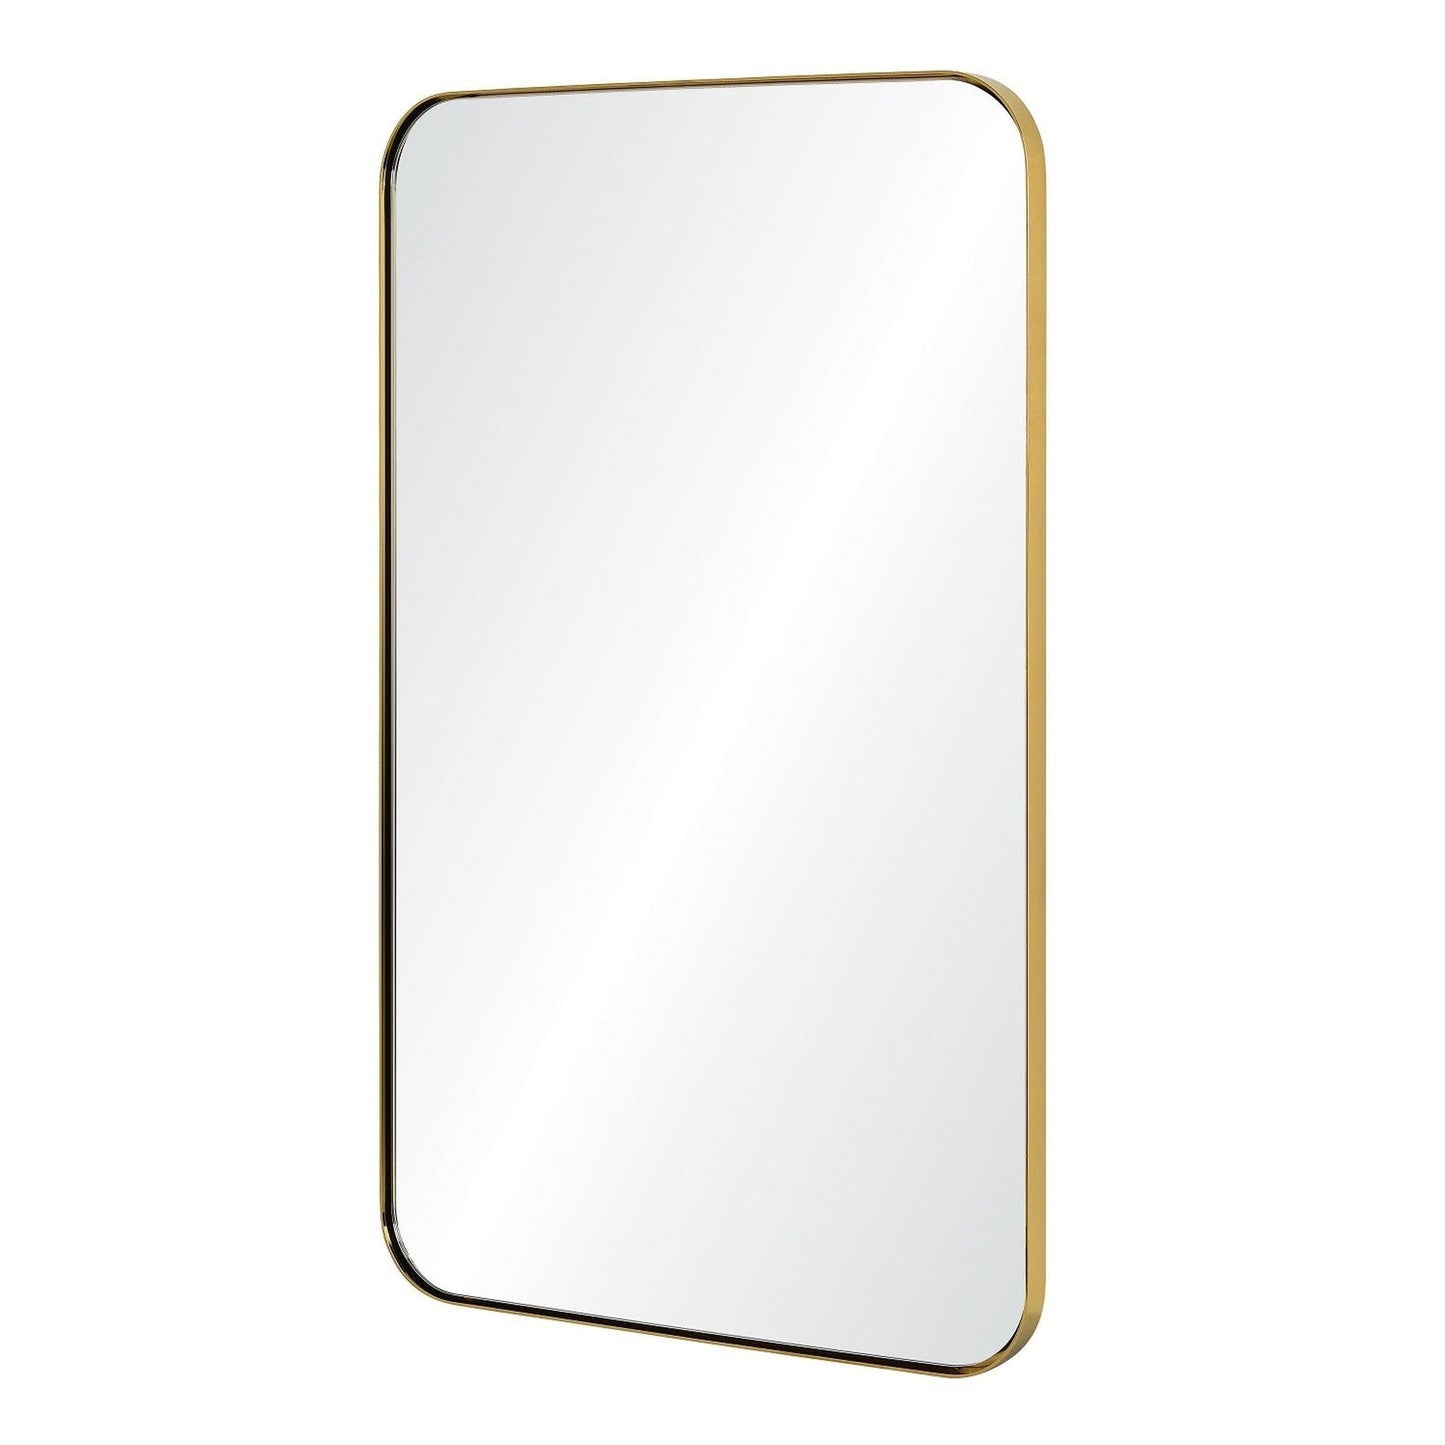 Mirror Home 26" x 42"Hand welded stainless steel bathroom mirror finished in burnished brass.